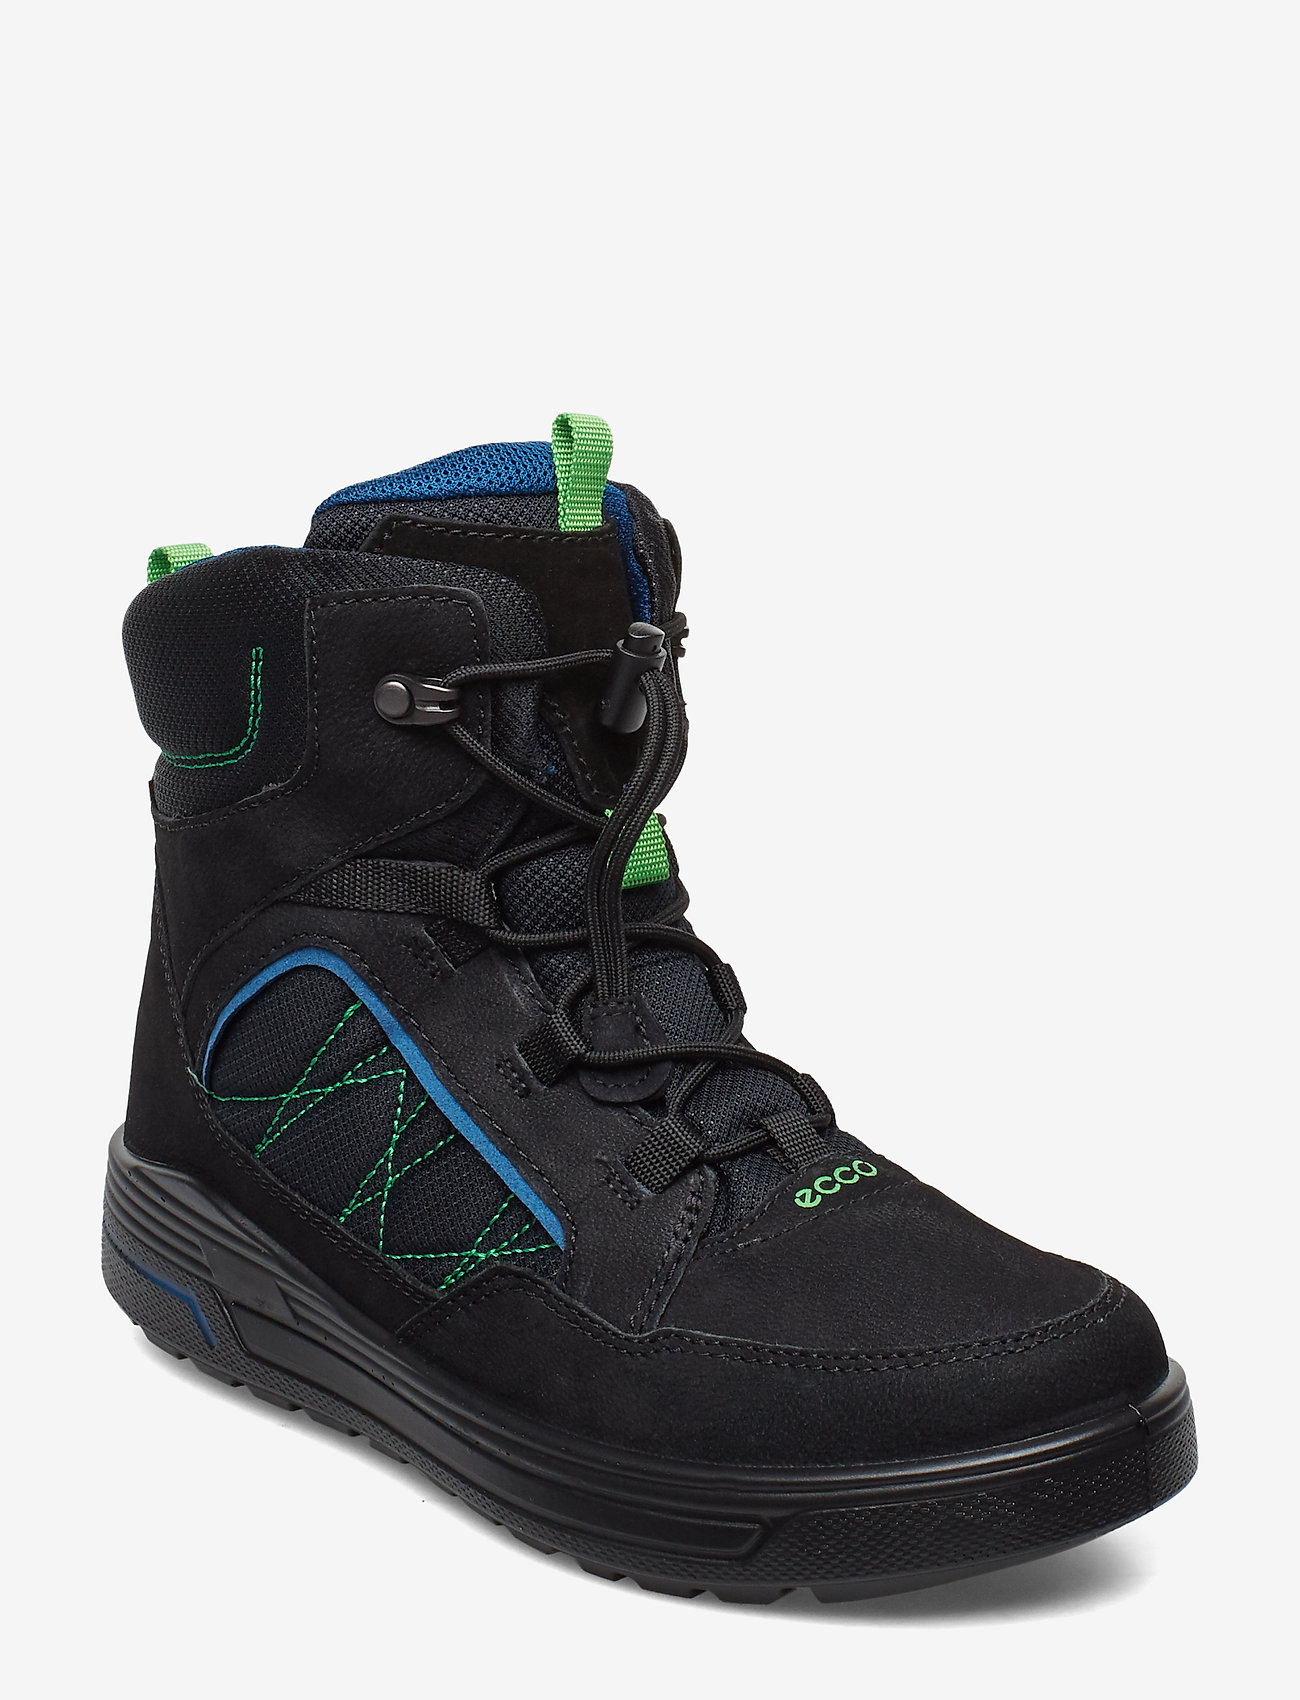 Urban Snowboarder Ecco, Now, Hotsell, 57% OFF, casic-la.org